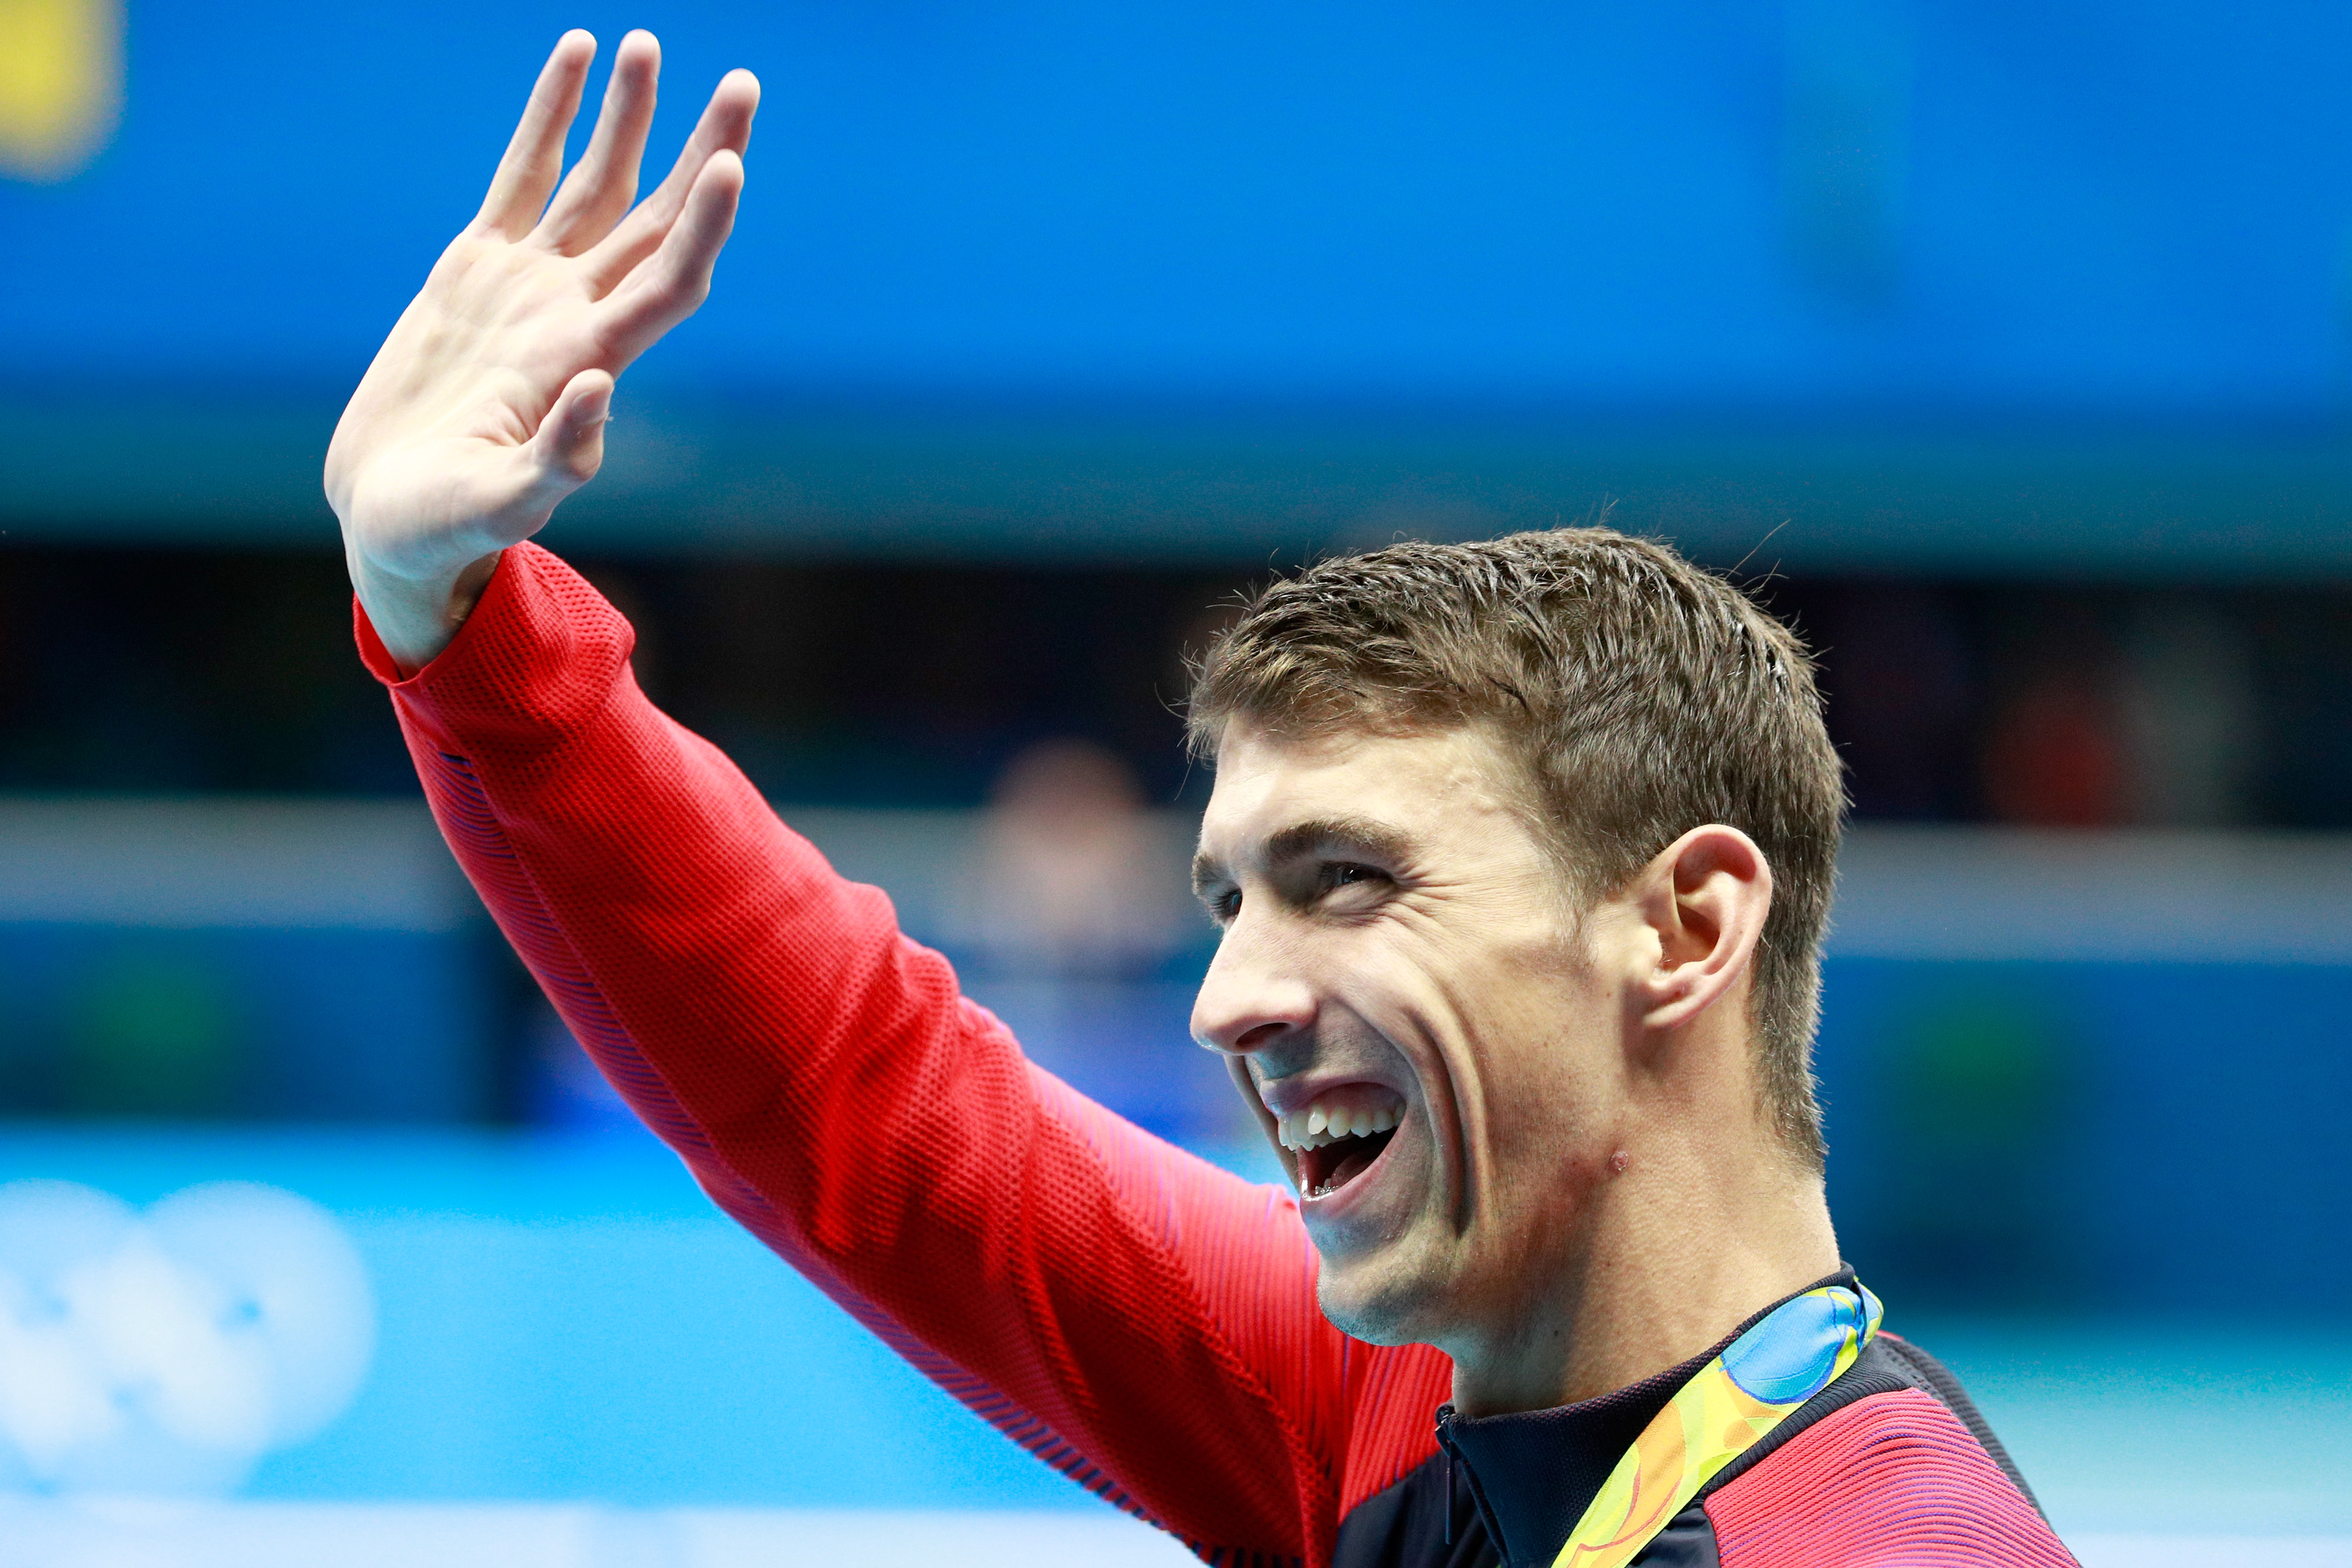 Michael Phelps : I'm not going four more years